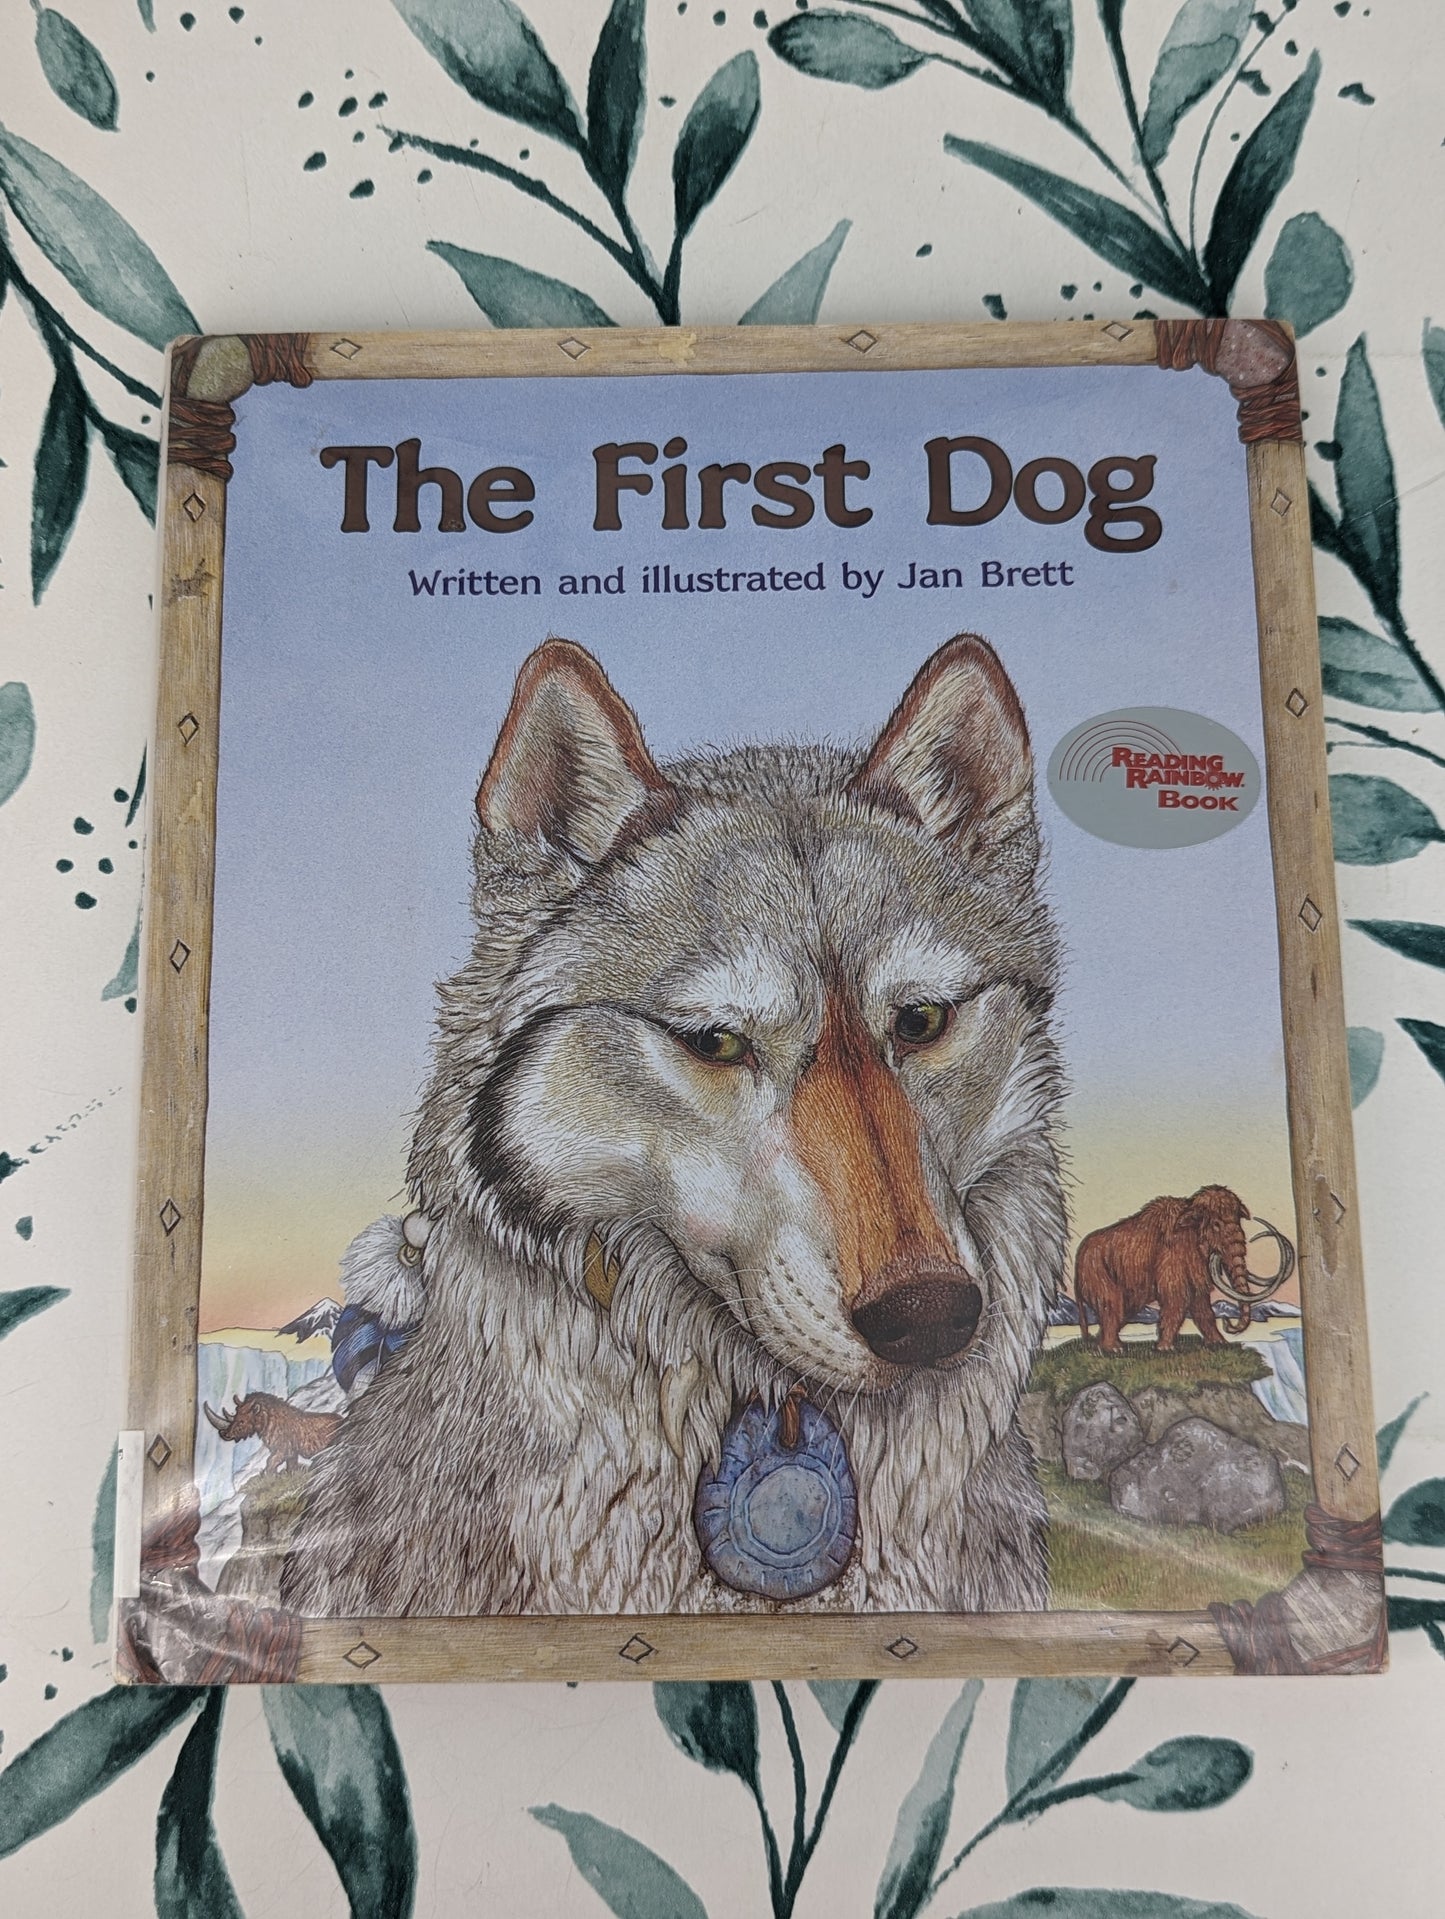 The First Dog (please see note for description)